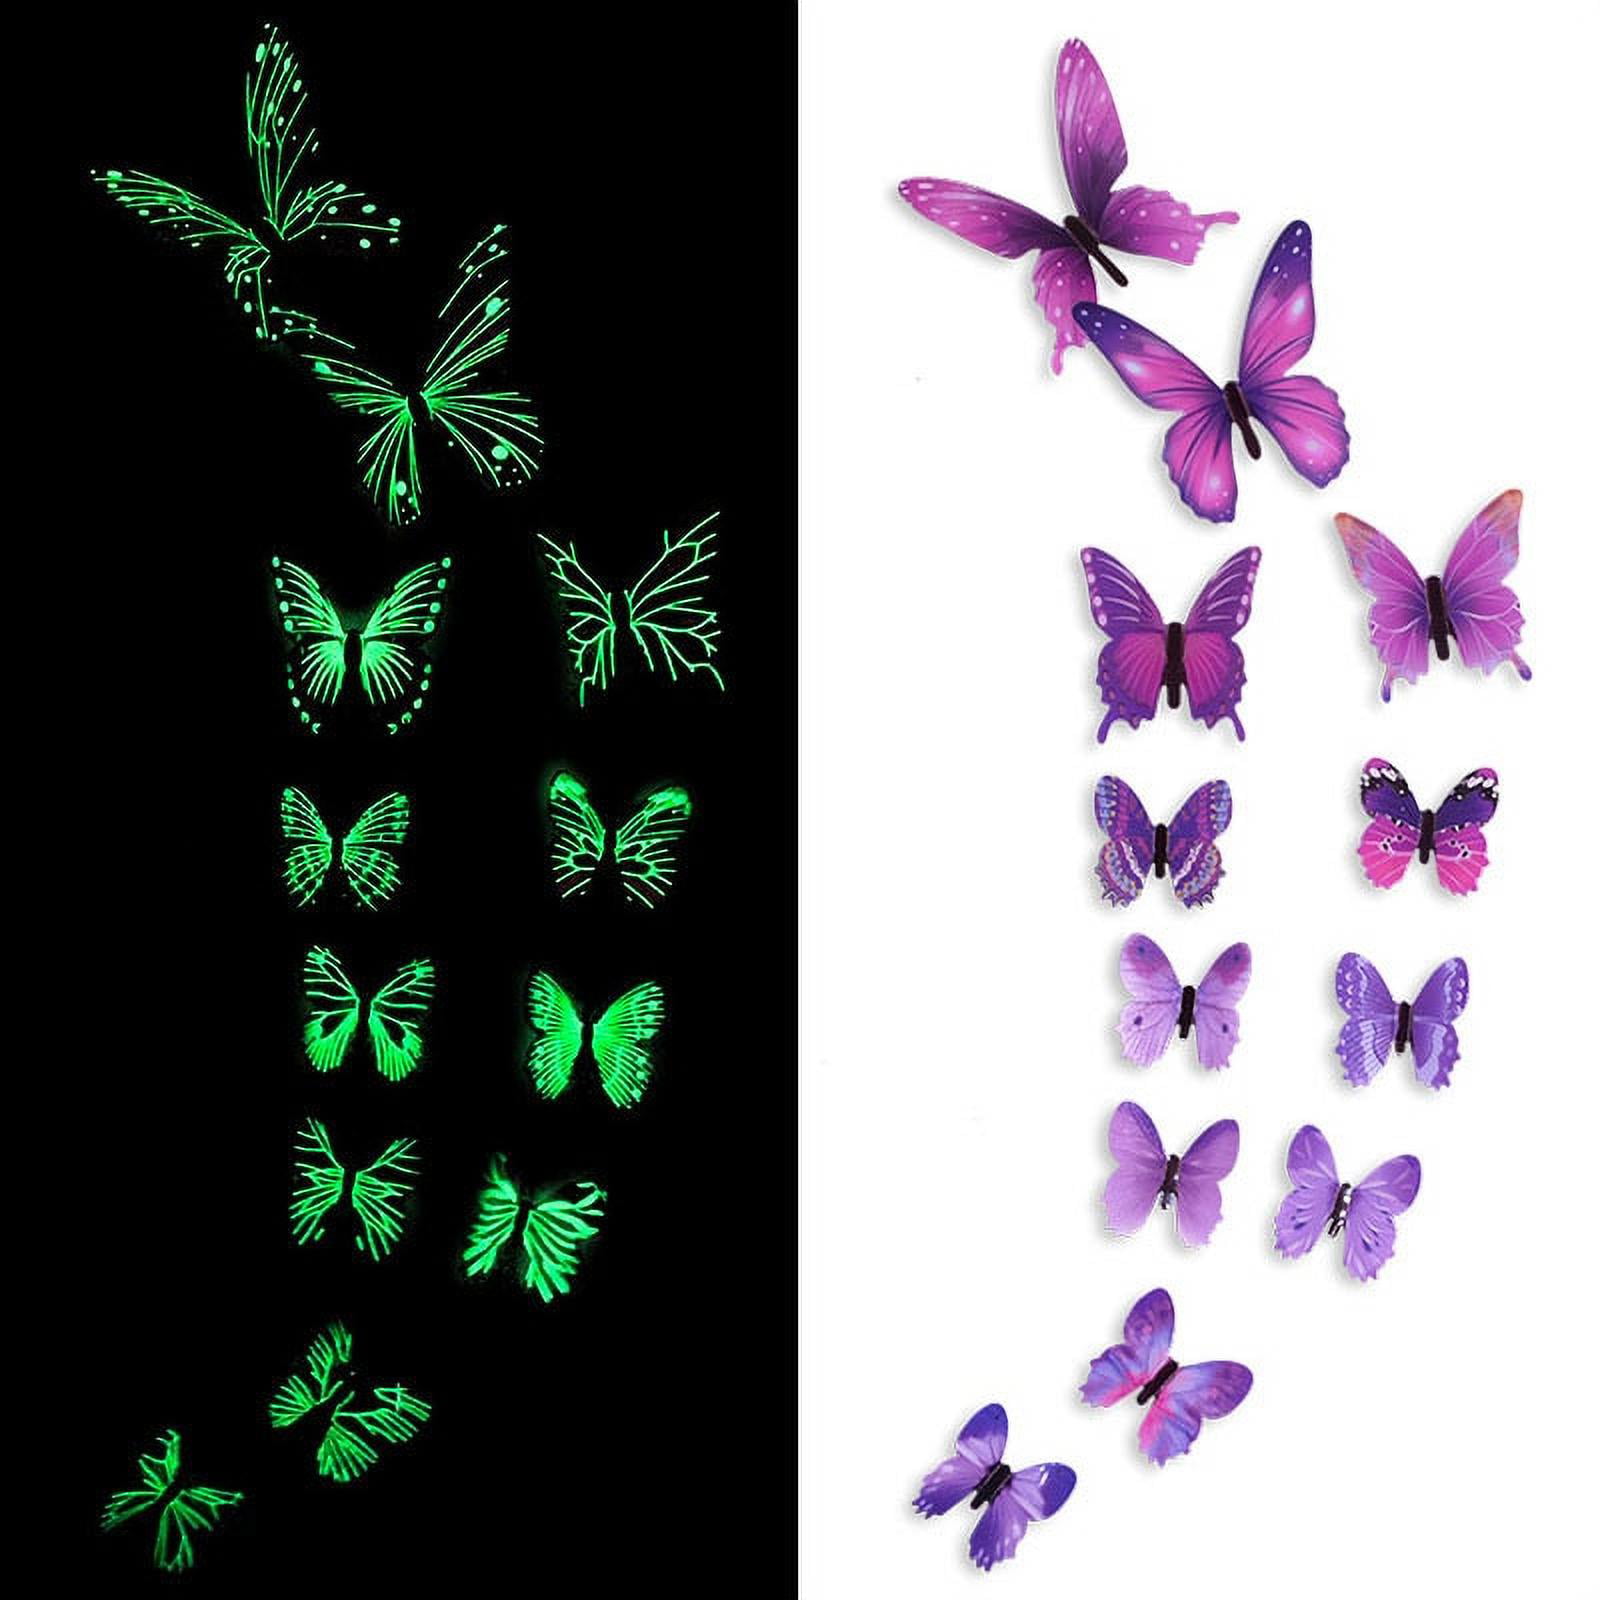 Details about   12pcs PVC 3D Crystal Butterfly Wall Stickers Art Decal DIY Home Bedroom Decorate 